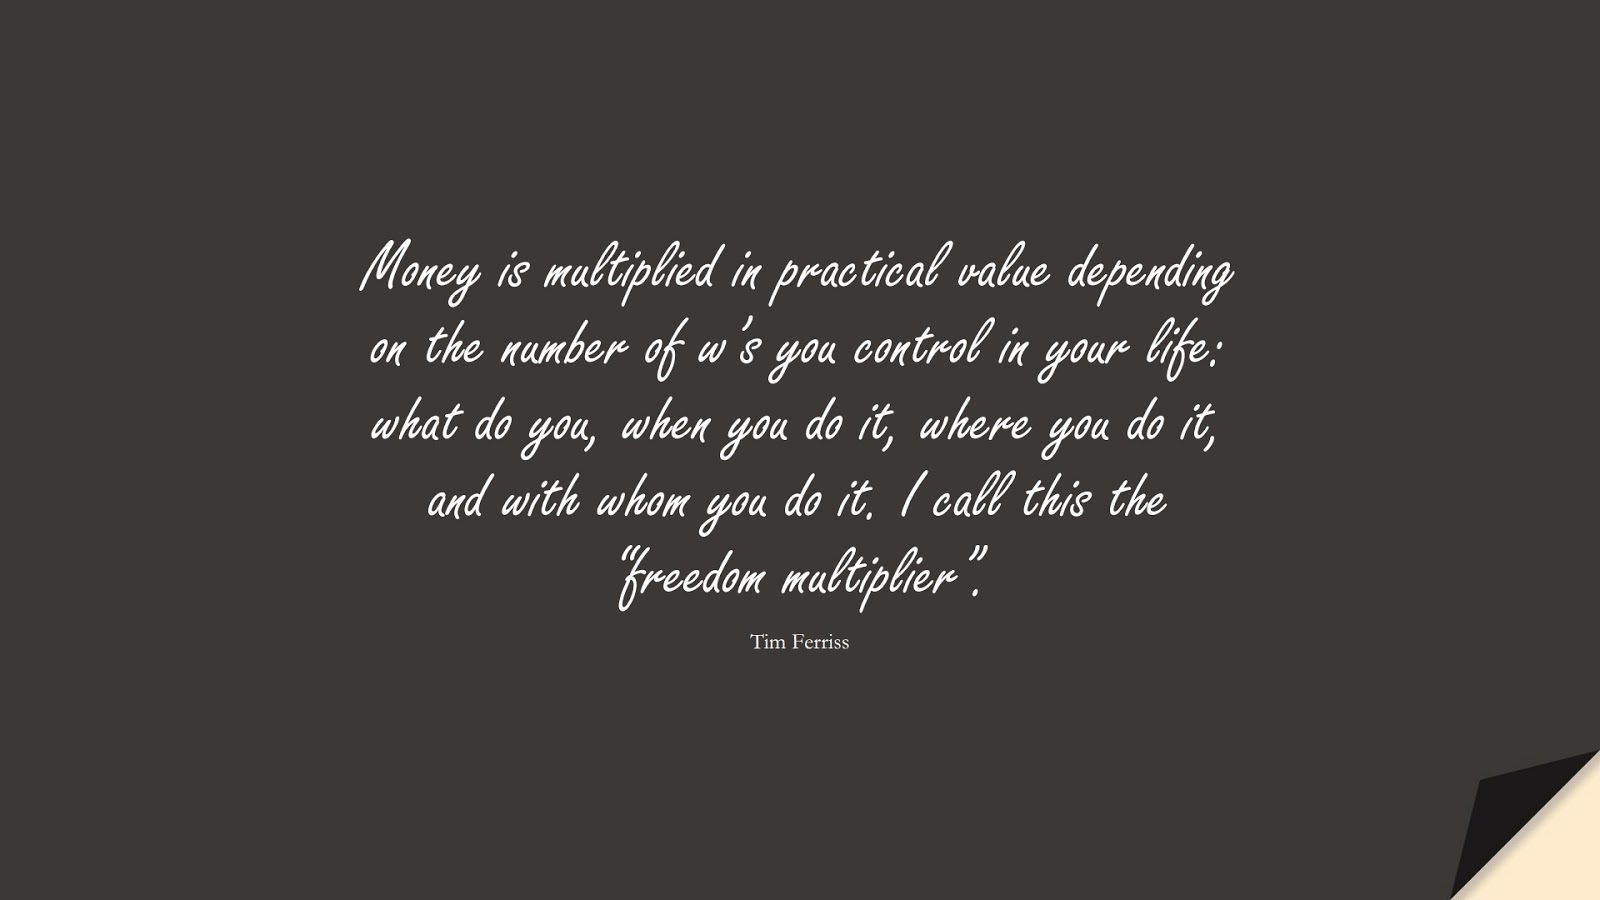 Money is multiplied in practical value depending on the number of w’s you control in your life: what do you, when you do it, where you do it, and with whom you do it. I call this the “freedom multiplier”. (Tim Ferriss);  #TimFerrissQuotes